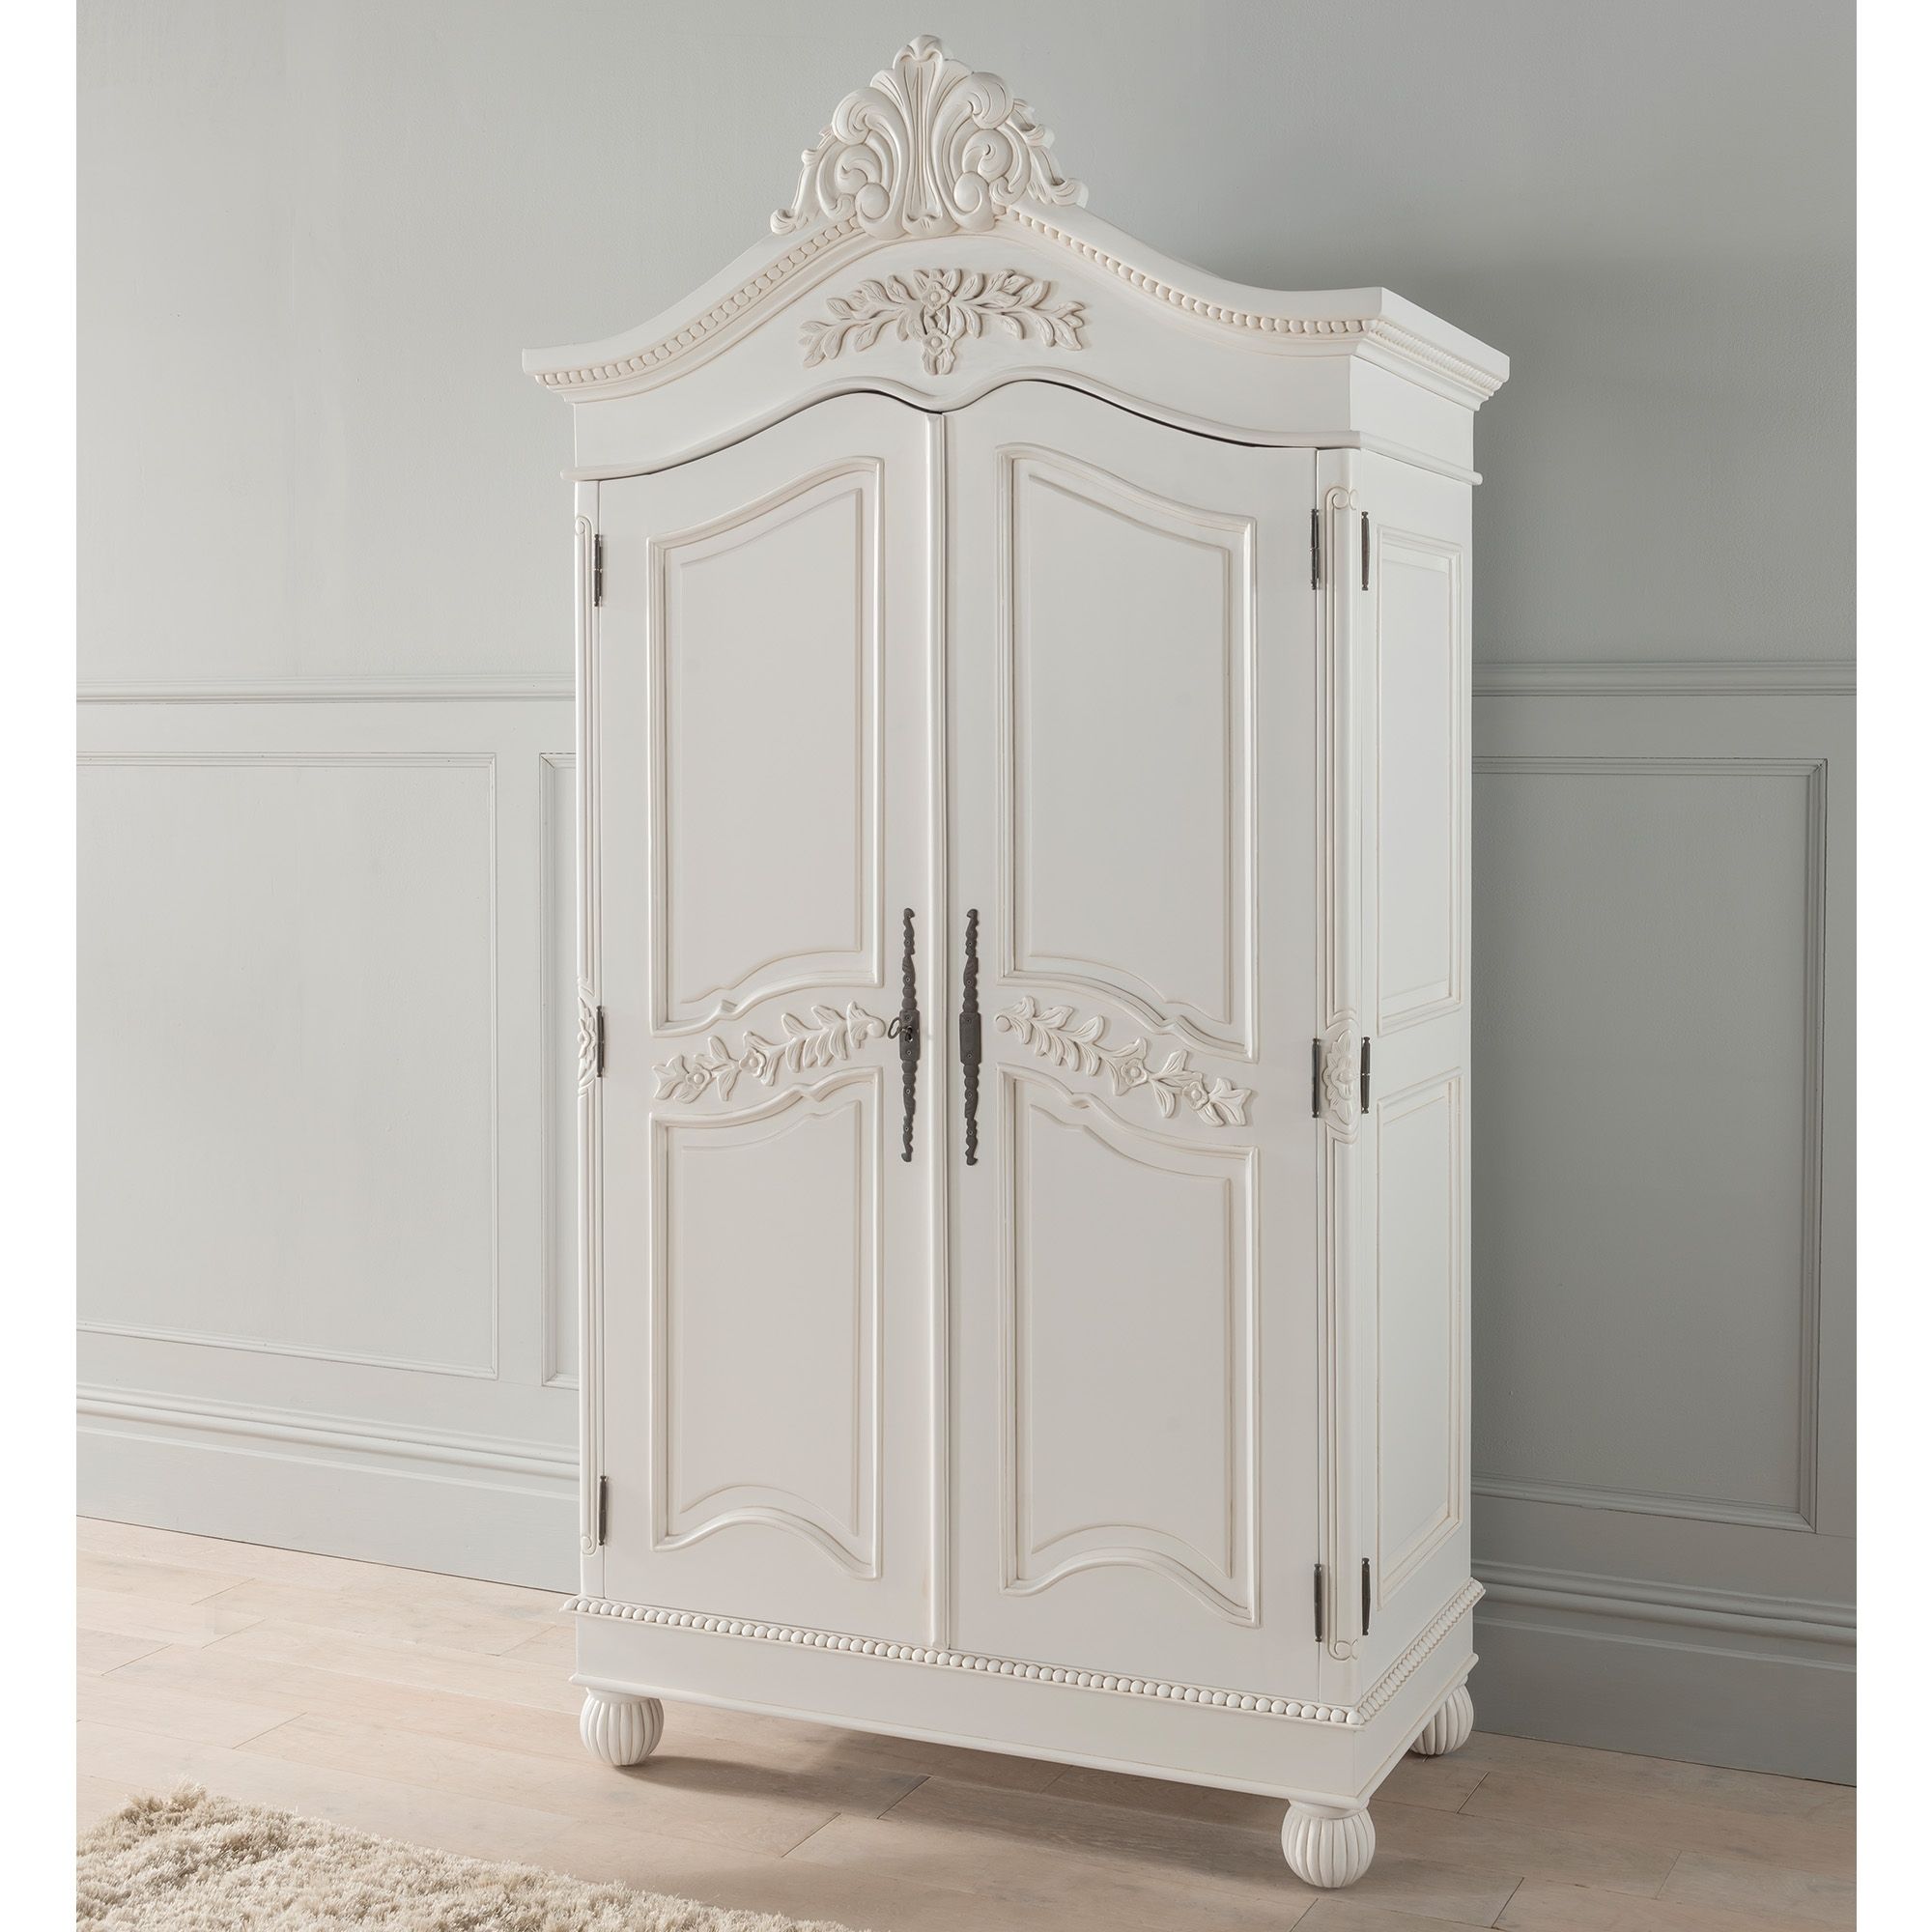 Antique French Style Wardrobe | Shabby Chic Bedroom Furniture In Cheap Shabby Chic Wardrobes (View 2 of 15)